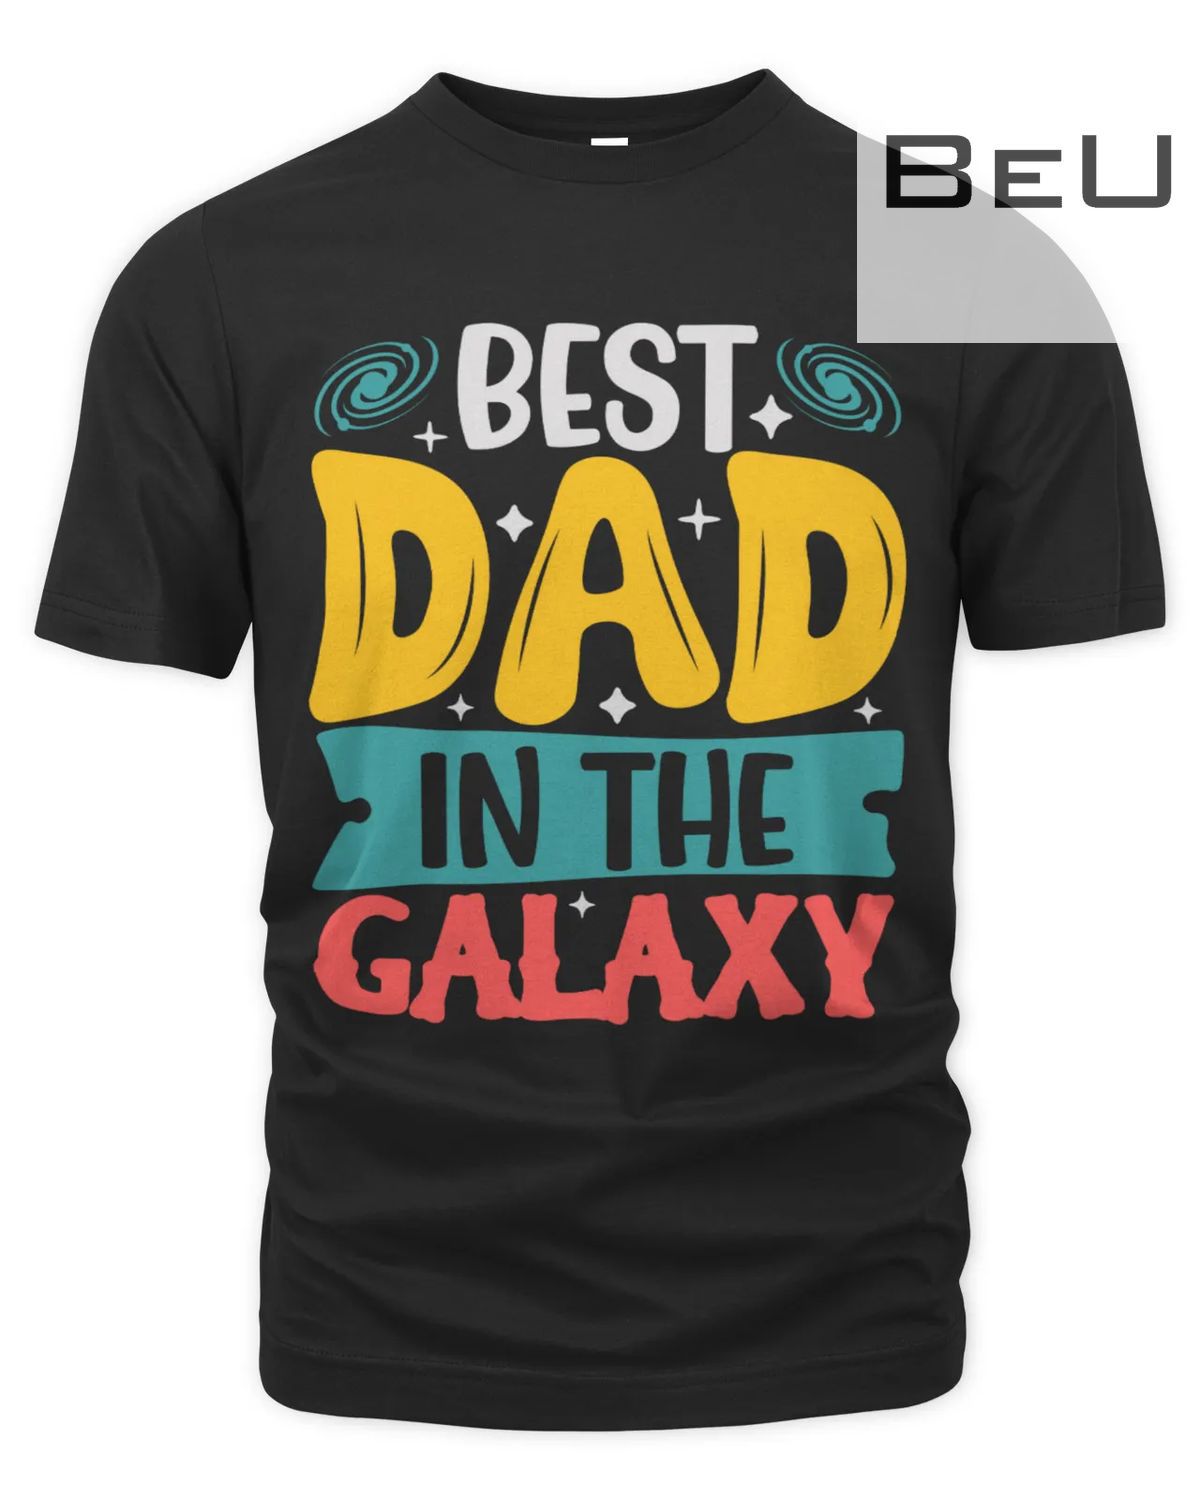 Best Dad In The Galaxy Retro Vintage Style T-shirt